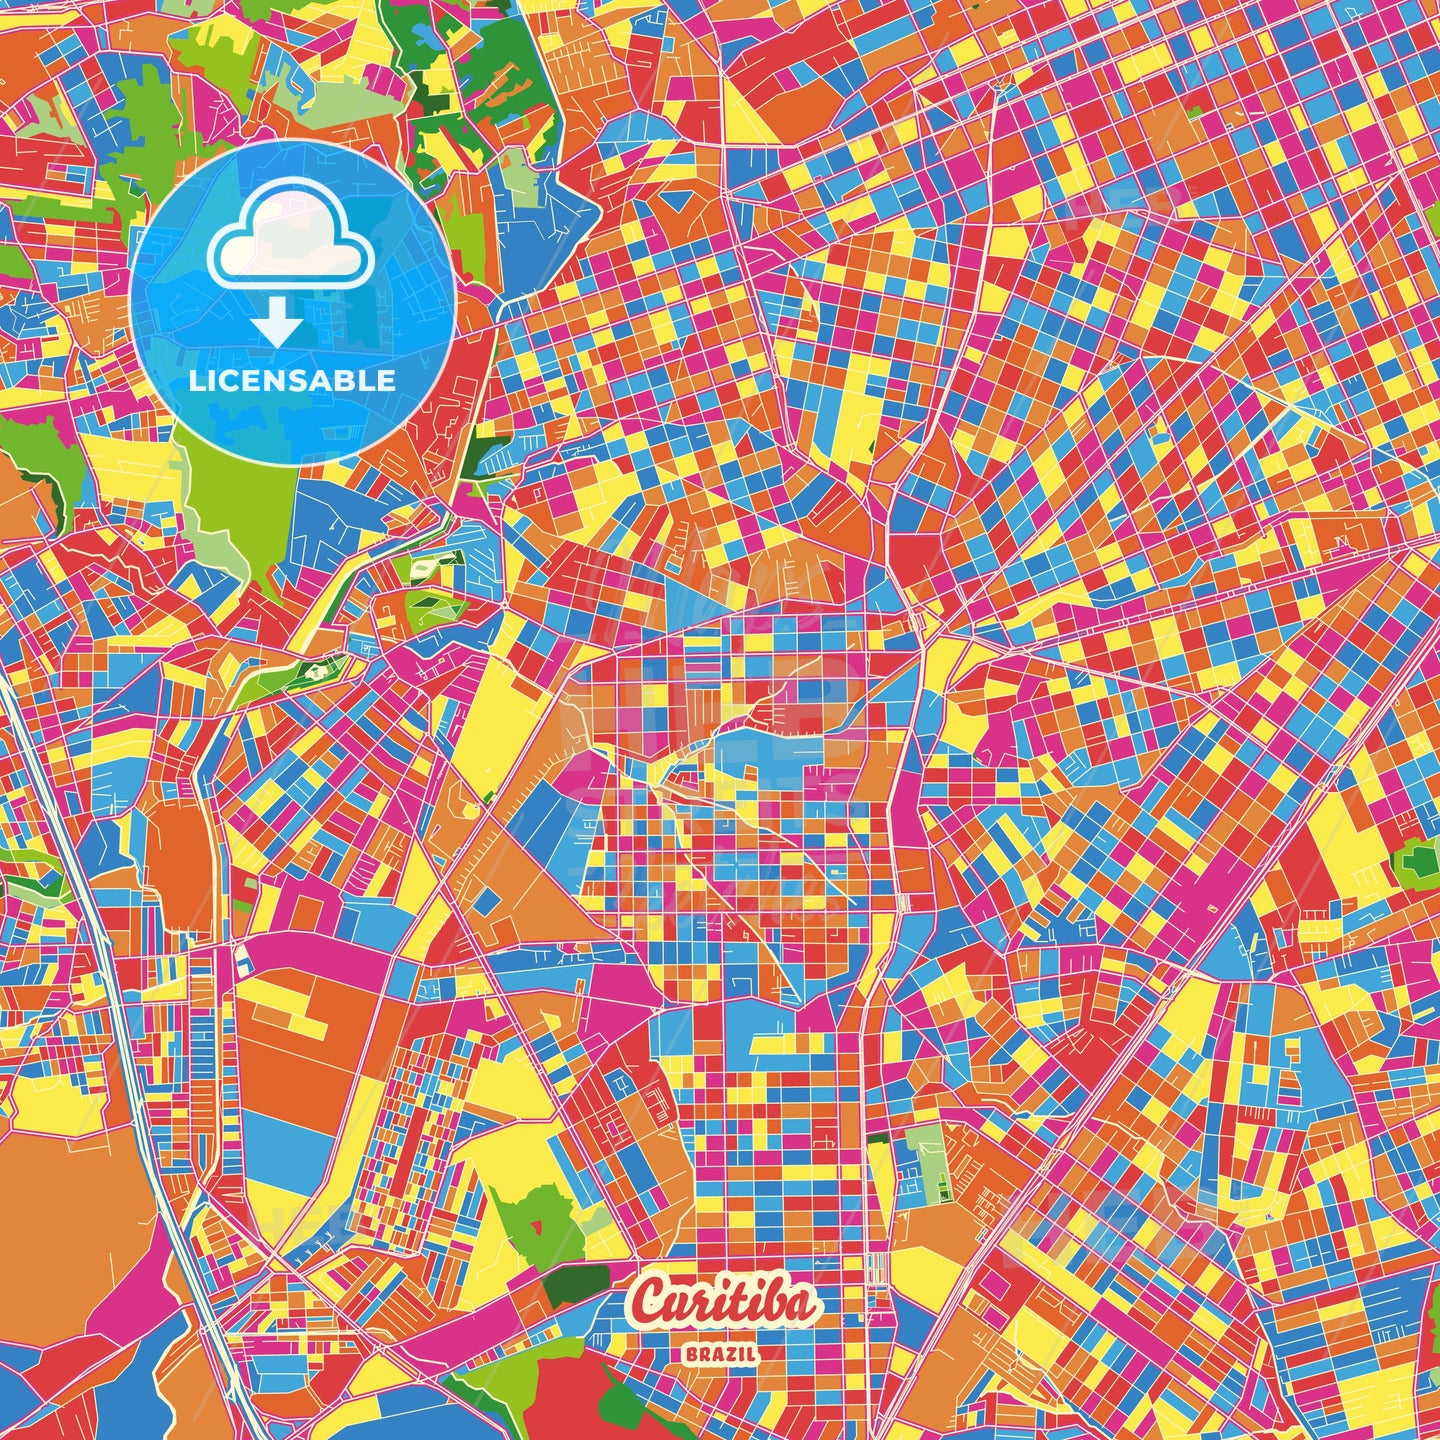 Curitiba, Brazil Crazy Colorful Street Map Poster Template - HEBSTREITS Sketches